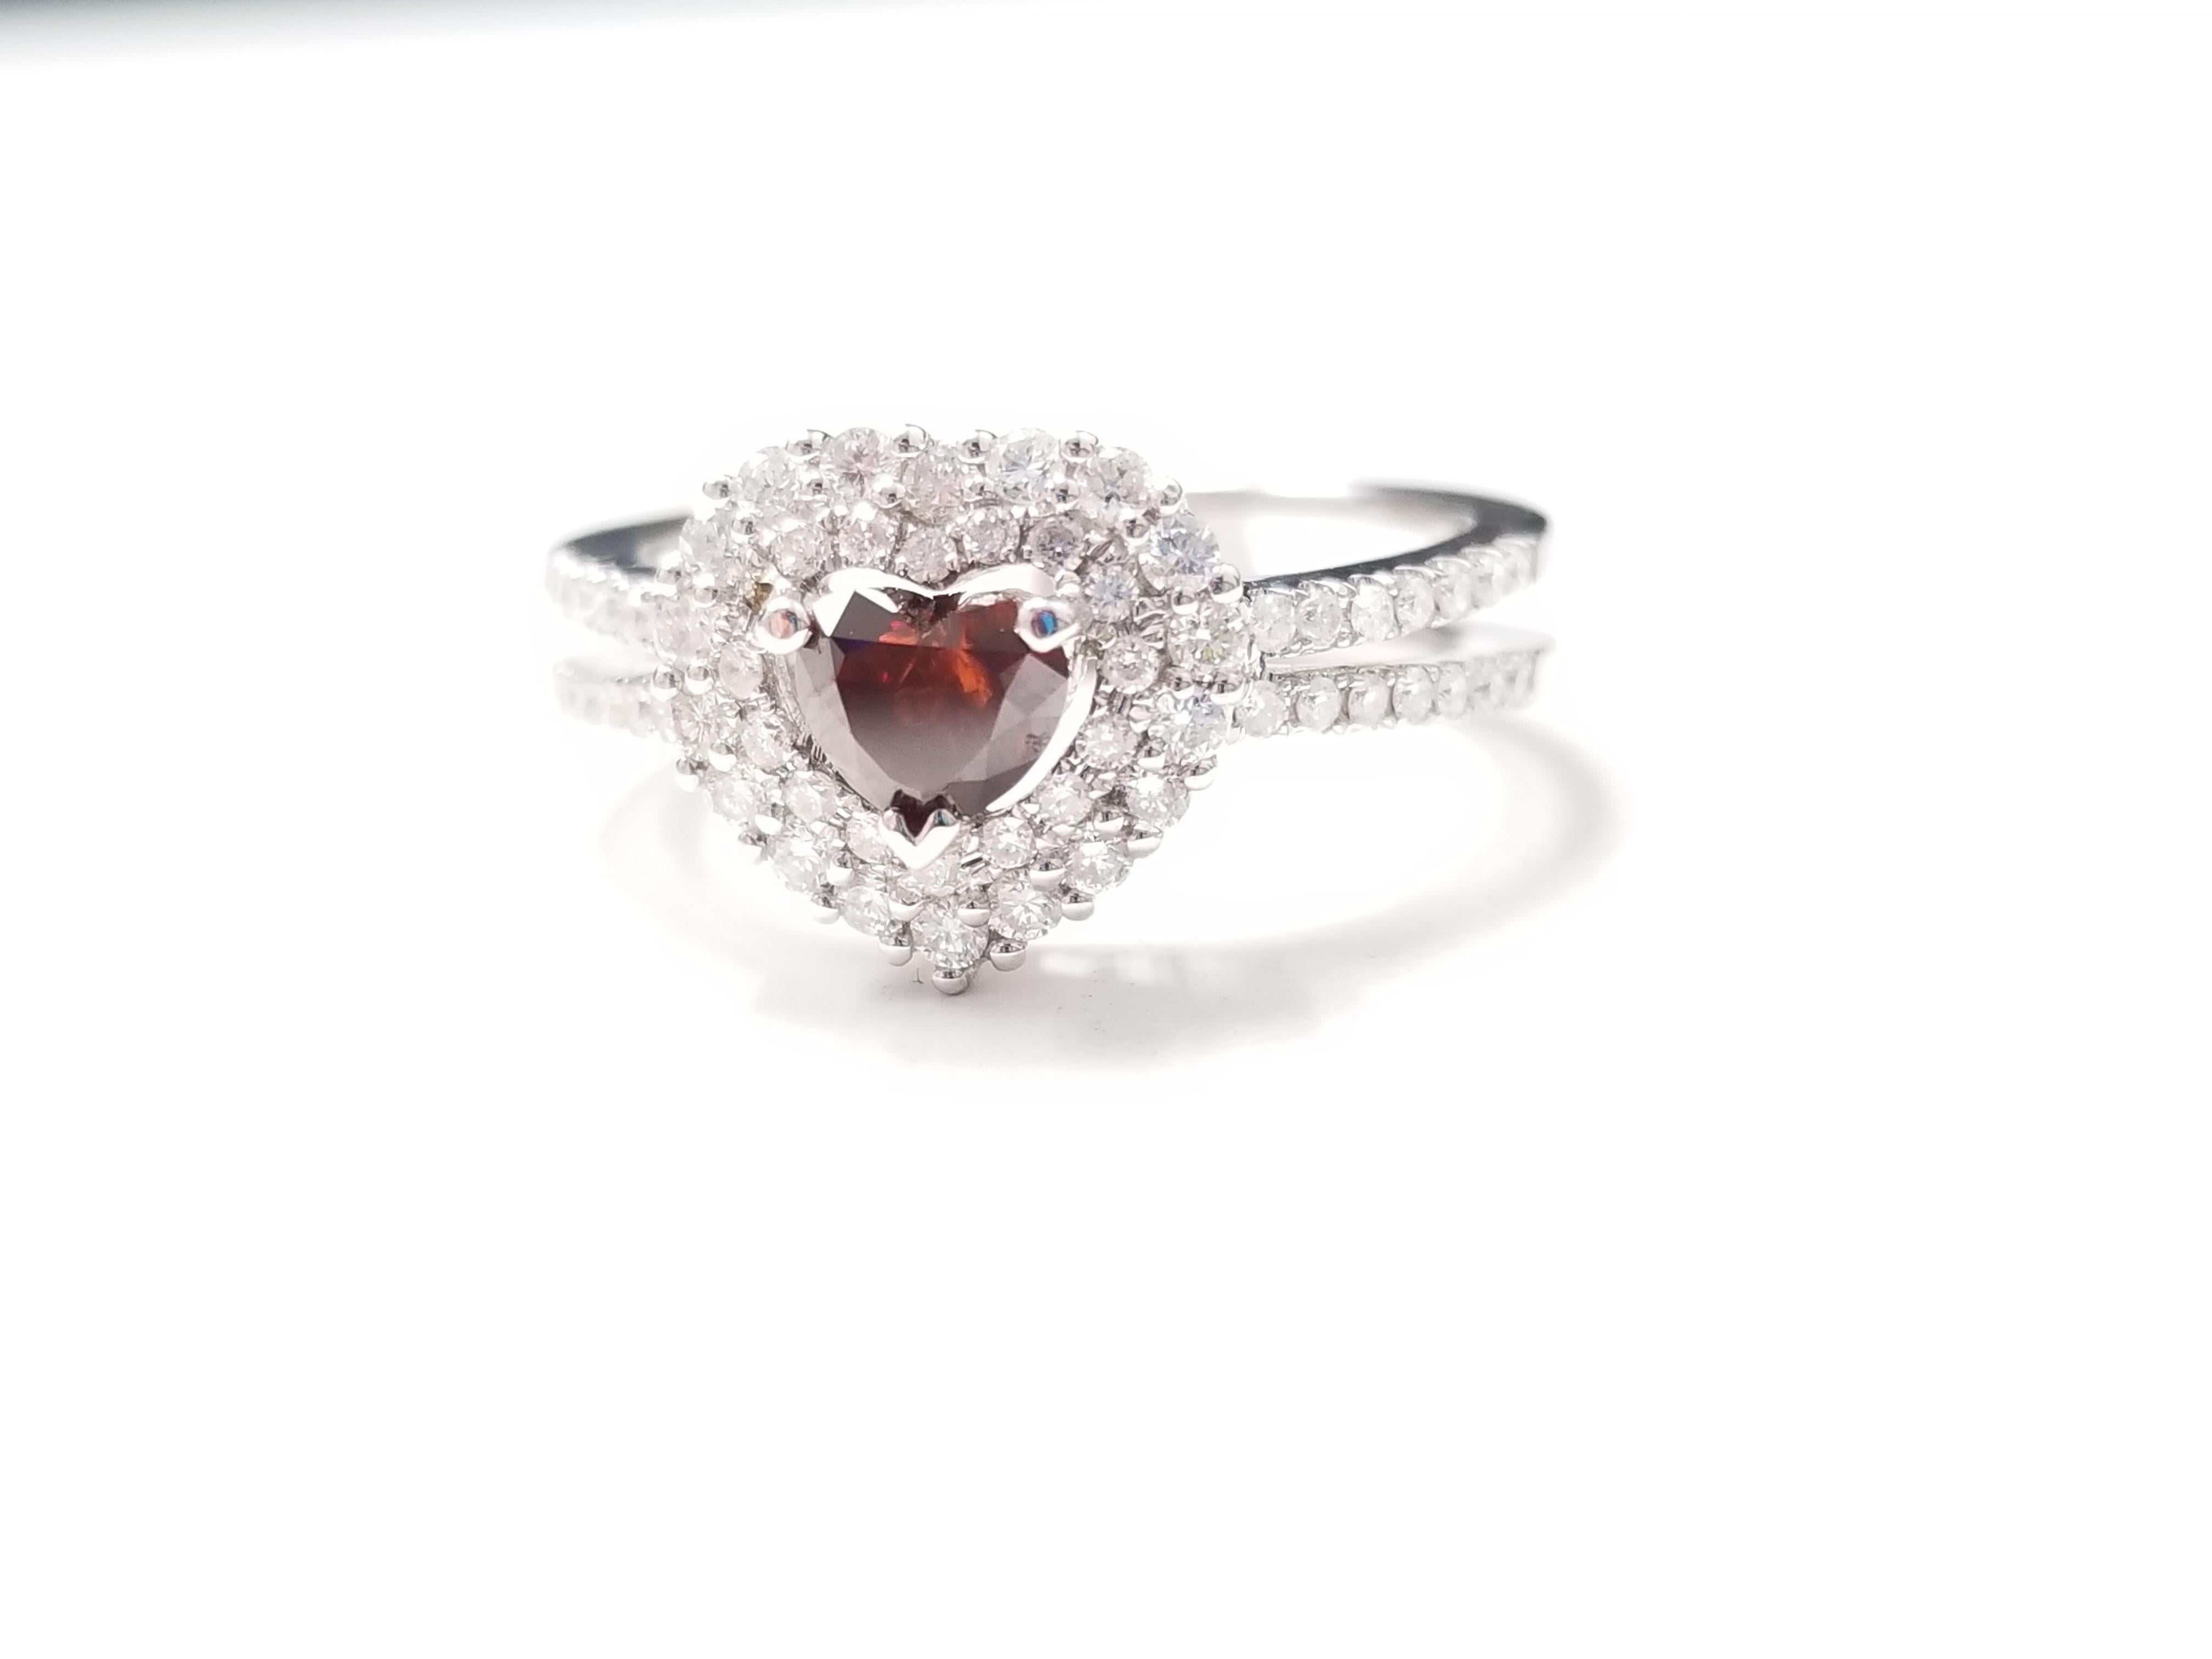 Fancy Reddish Brown Red Face up heart shape natural GIA diamond weighing 0.52 carats. Surrounded by beautiful white diamonds in the halo split setting. Its transparency and luster are excellent. Set on 18K white gold. Ring Size 6.5.